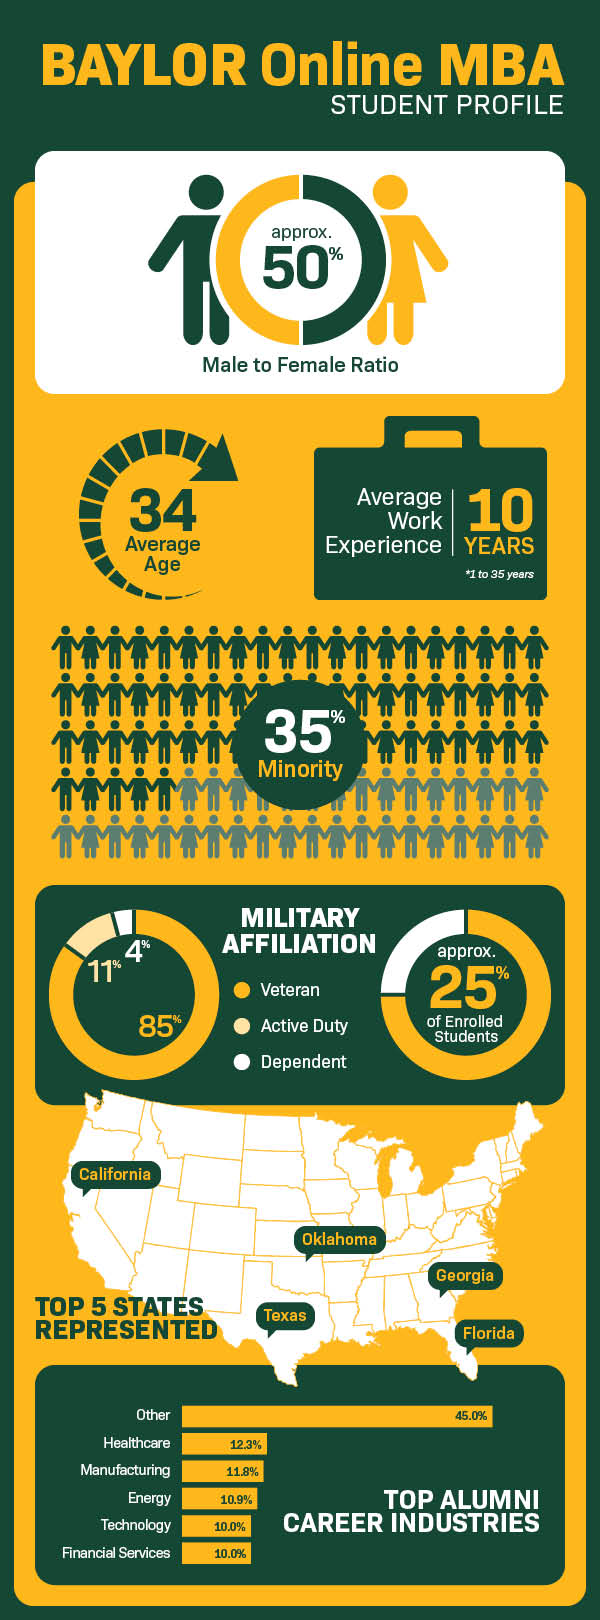 Baylor Online MBA student profile infographic: Male to female ratio is approx 50%; average age is 34; average work experience is 10 years; minority demographics comprise 35%; Approx 25% of students enrolled are military affiliated